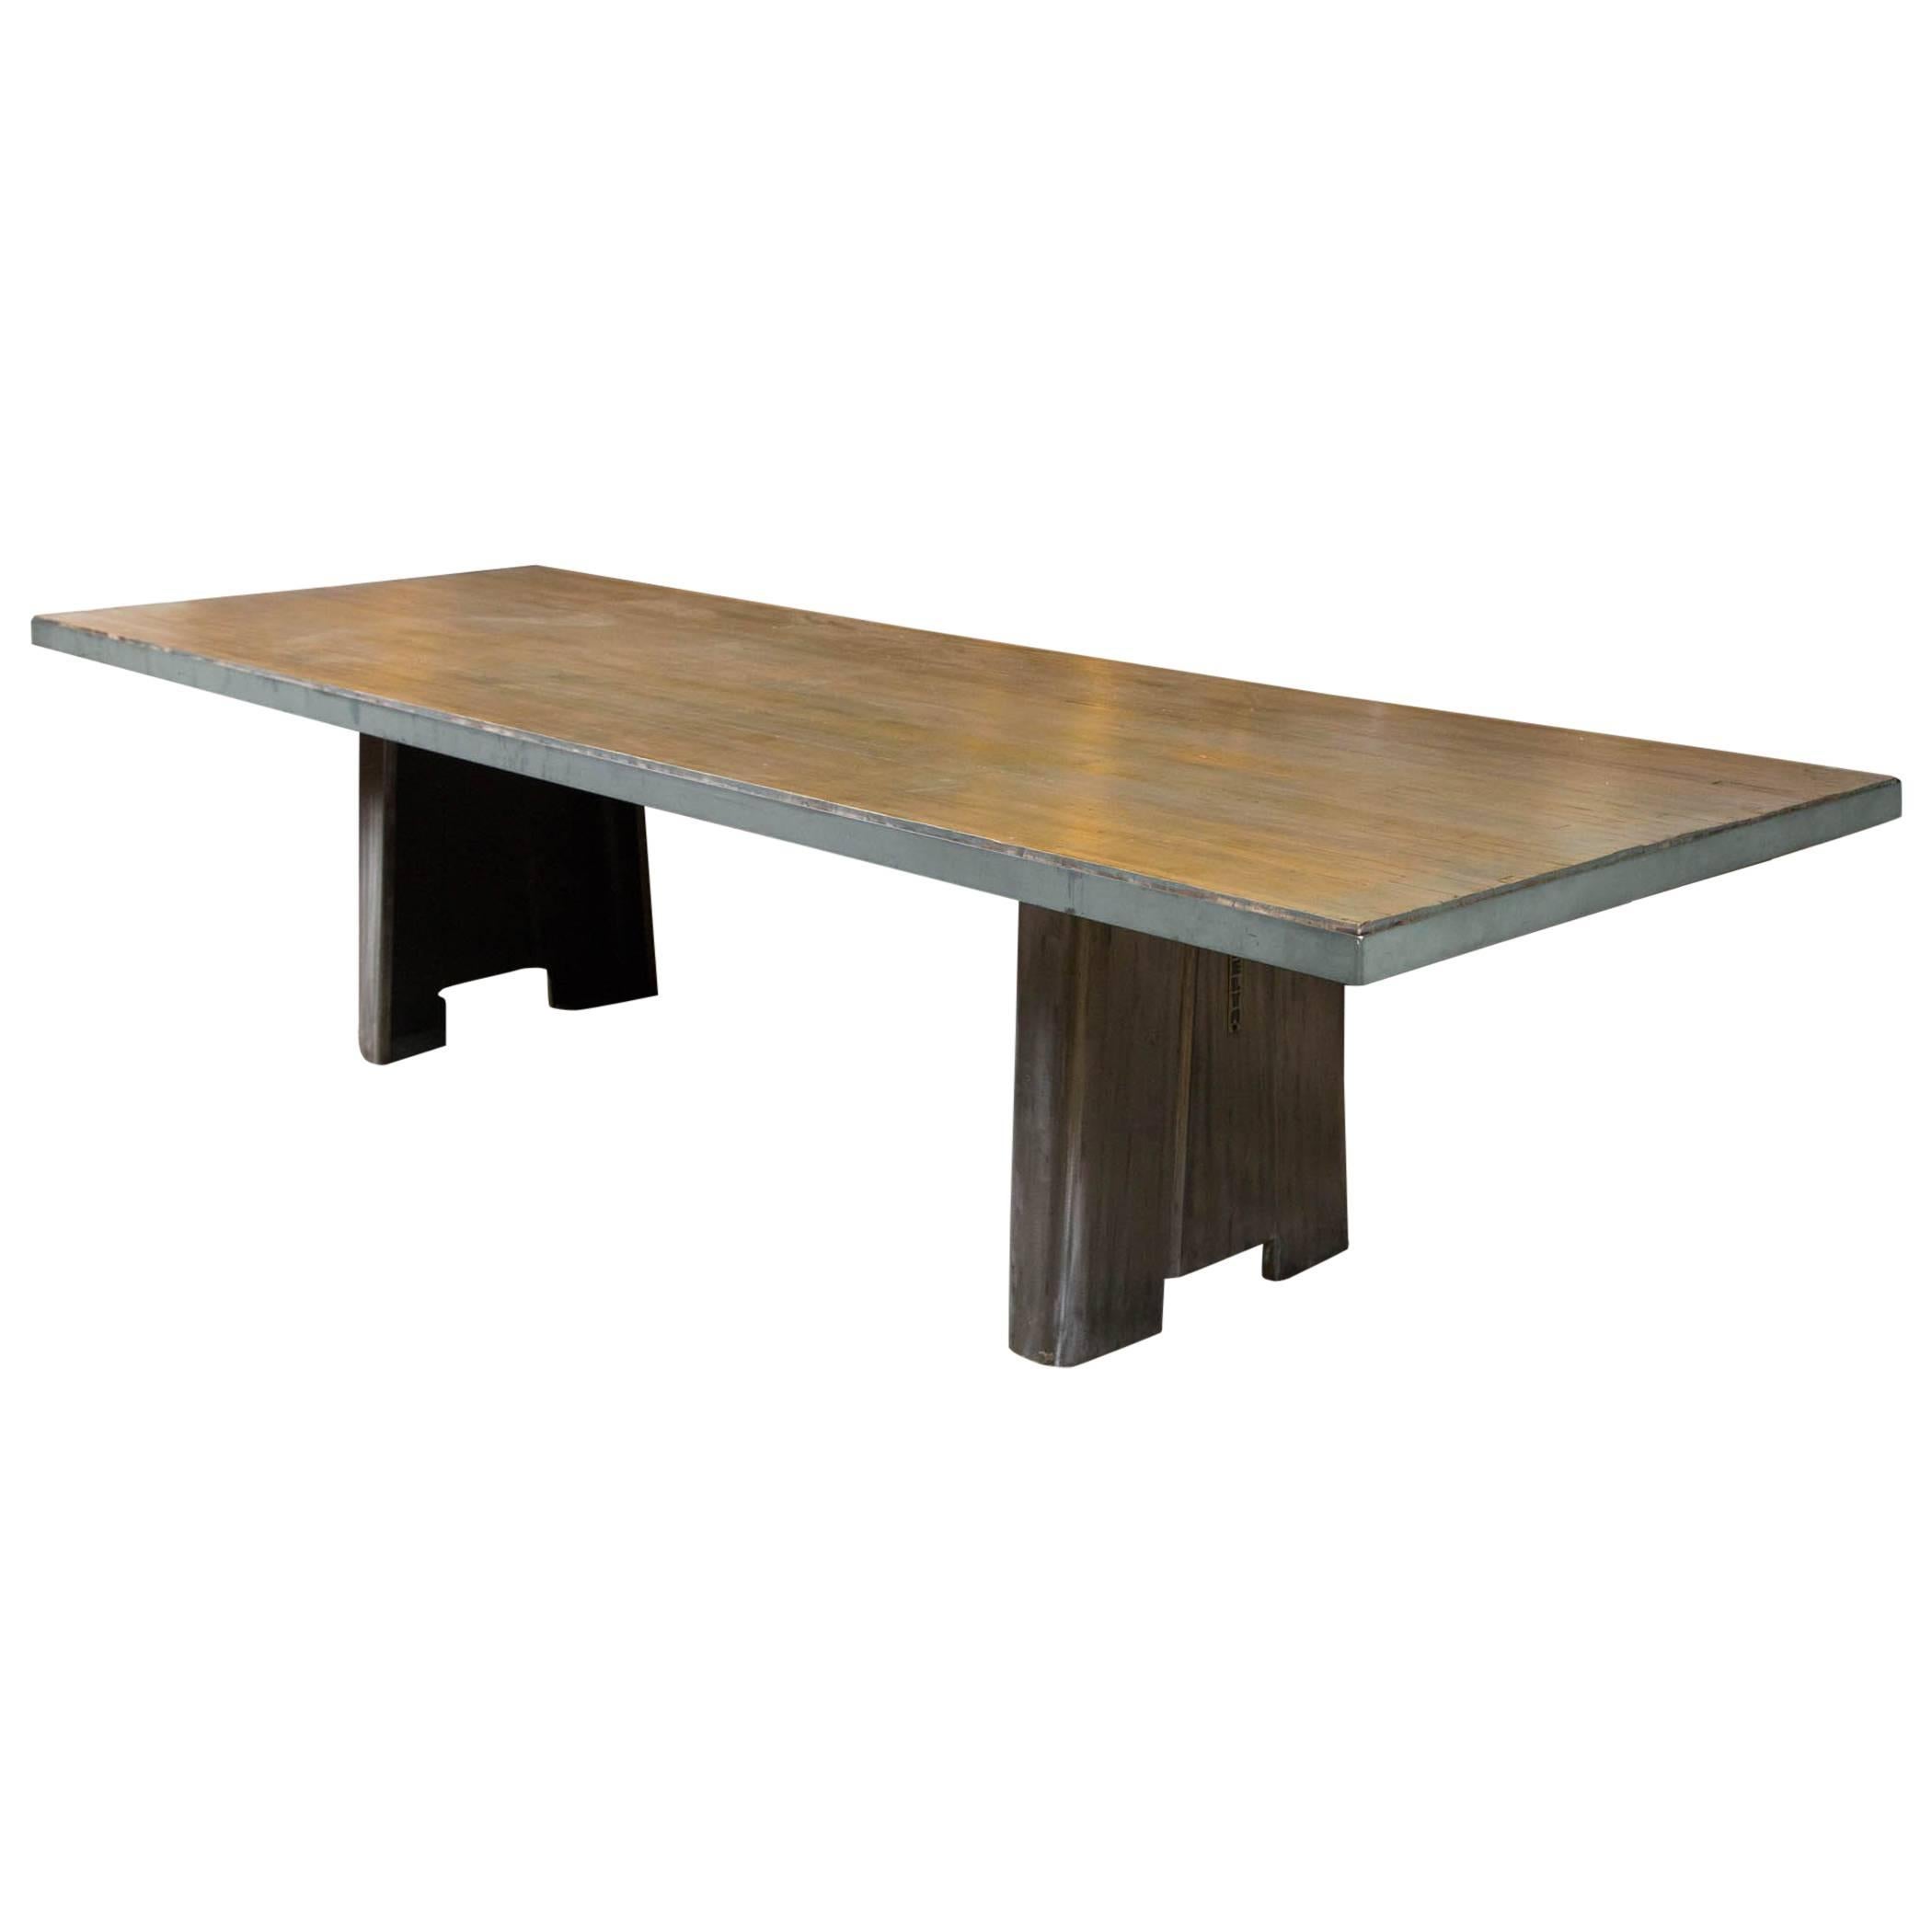 Bowing Alley Top Industrial Base Table